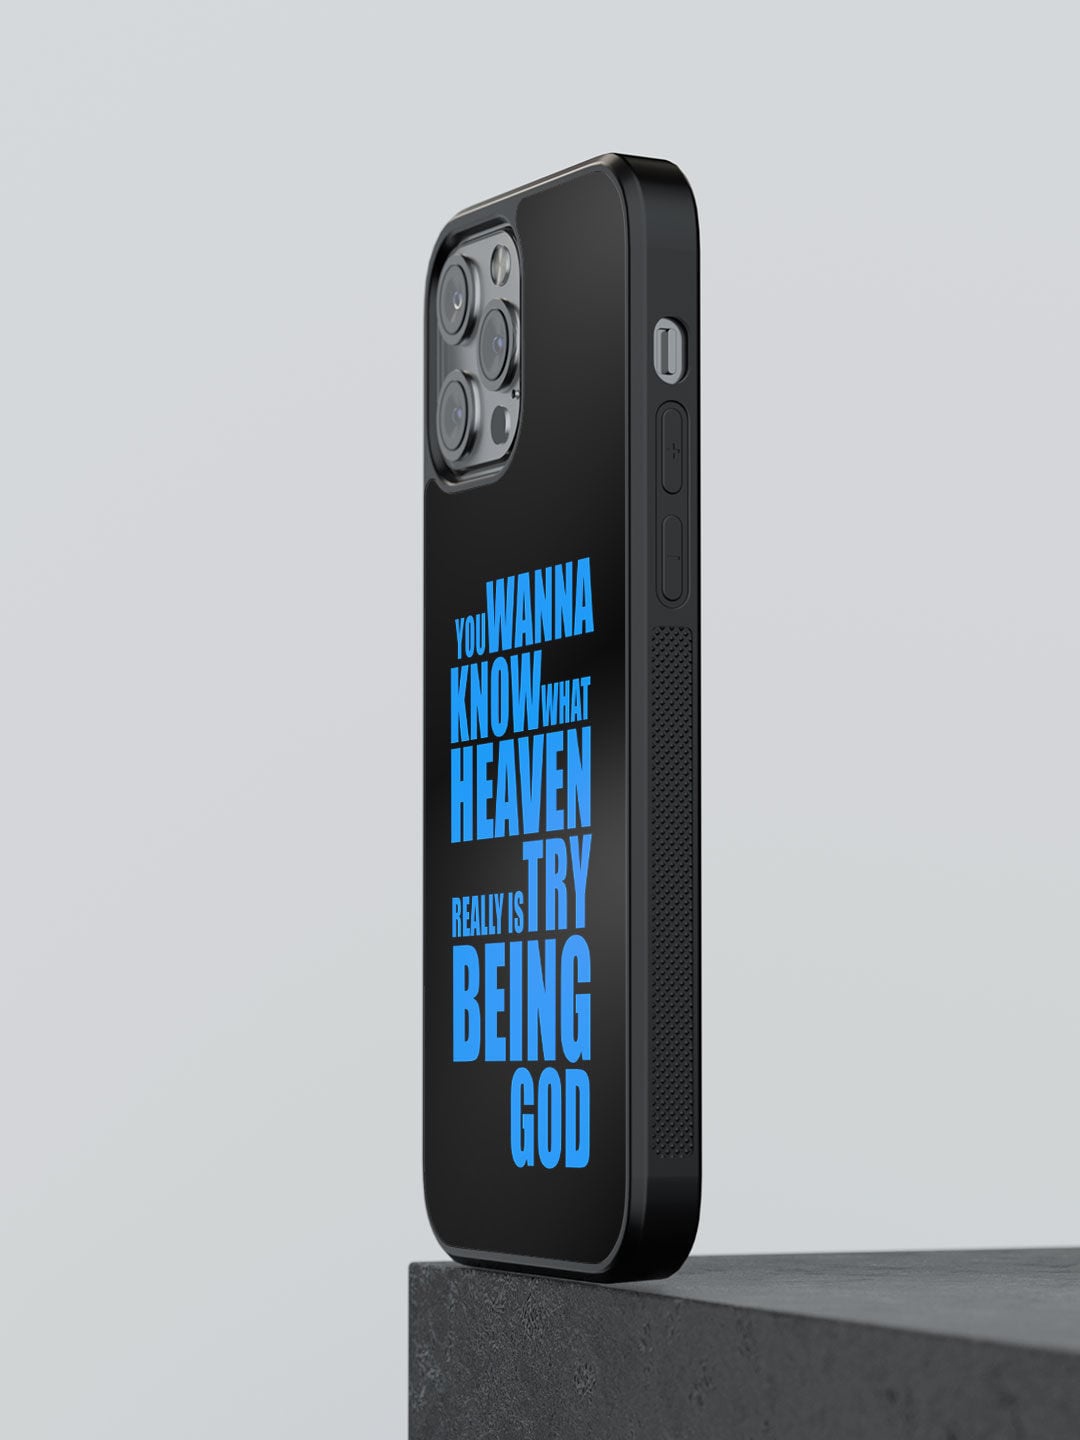 

macmerise Black & Blue Printed Try Being God iPhone 13 Pro Max Phone Back Case